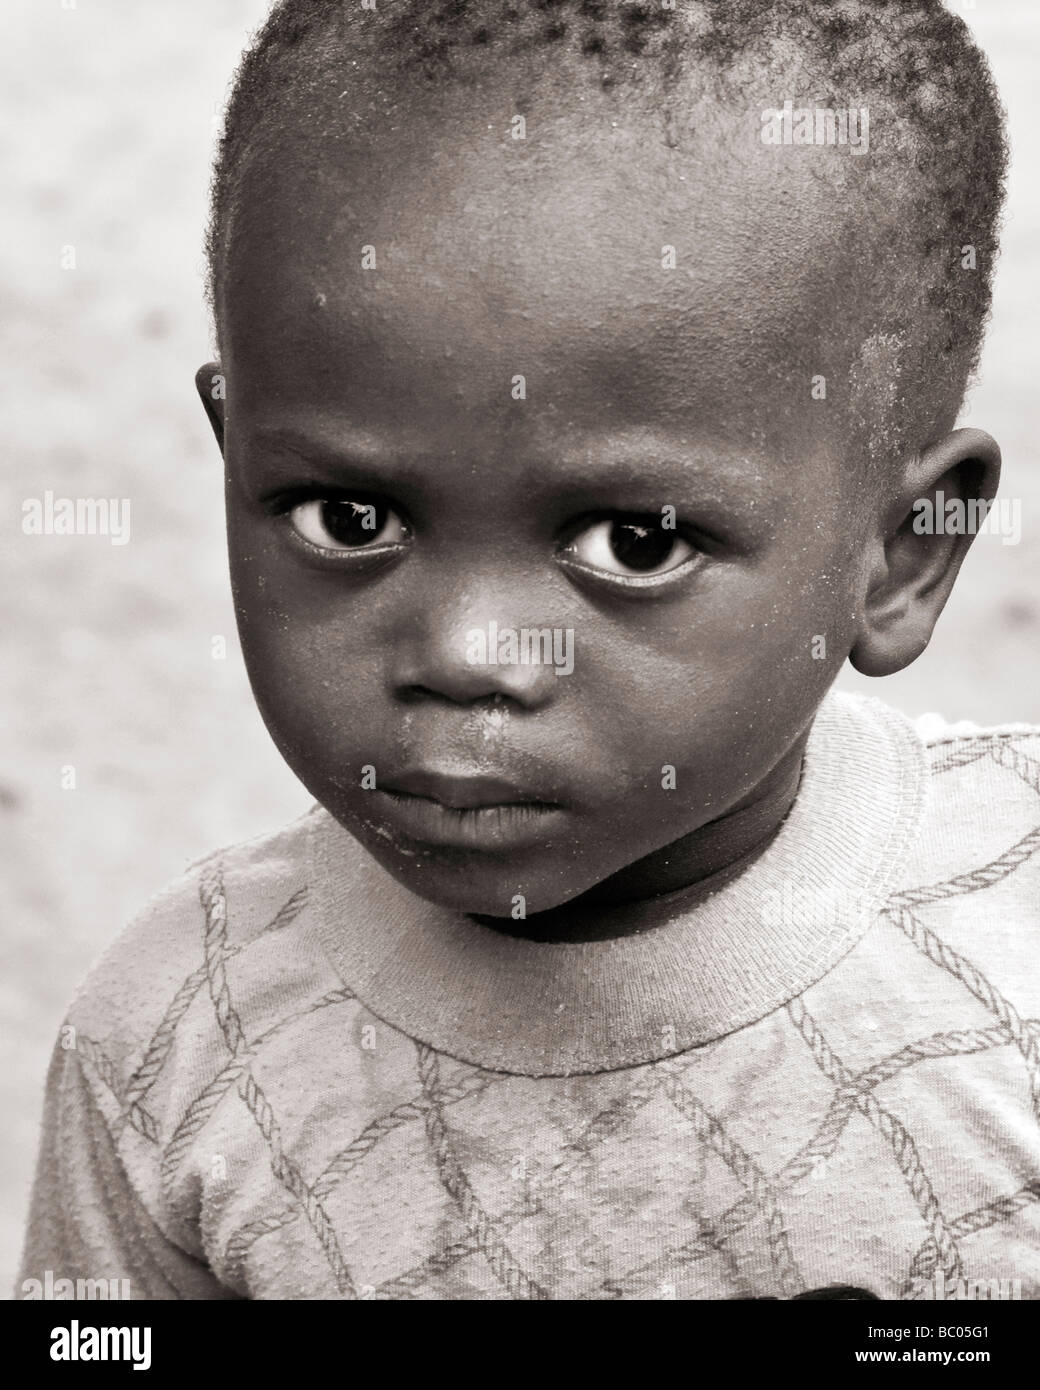 Sepia toned head and shoulders candid portrait of a small black African boy Stock Photo